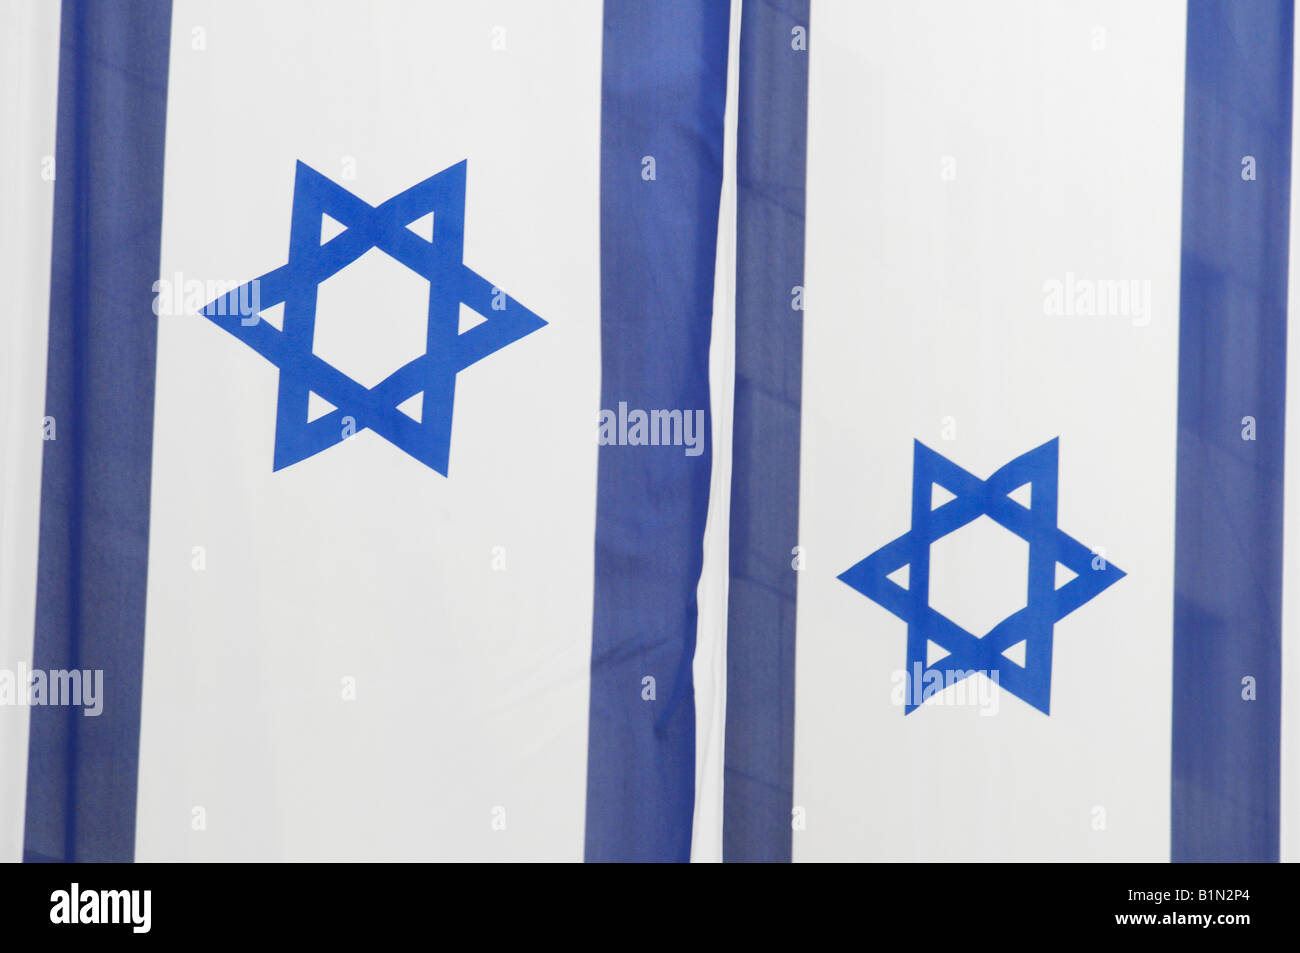 Two Israeli flags on display in Jerusalem during the 60th anniversary celebrations of the State of Israel. Stock Photo